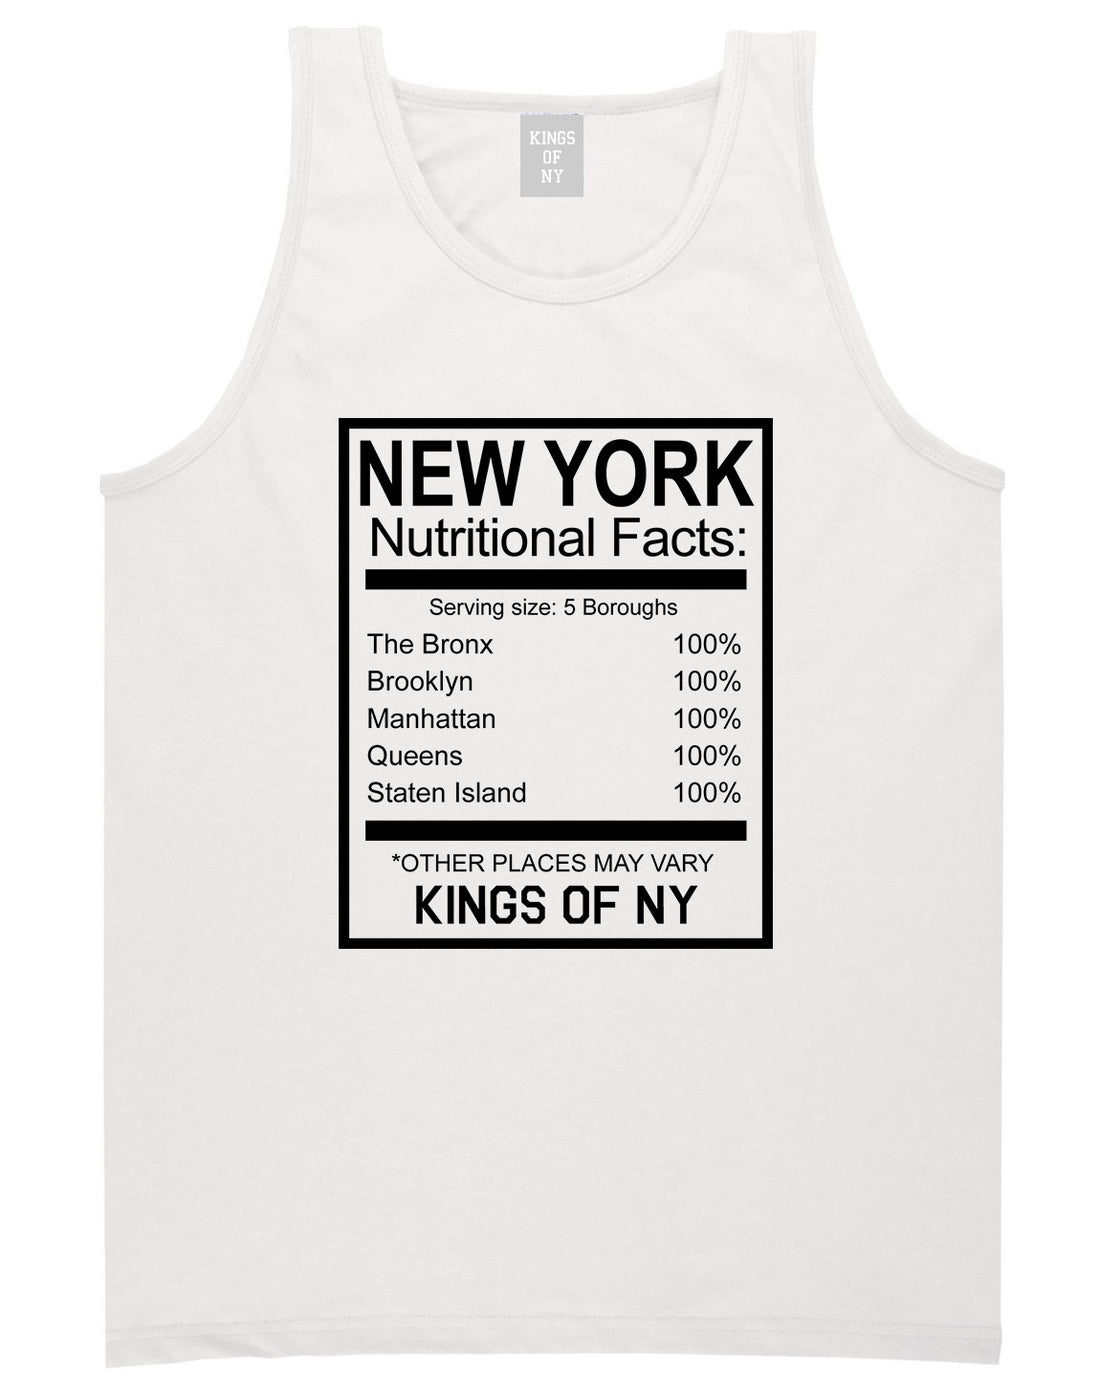 New York Nutritional Facts Tank Top Shirt in White